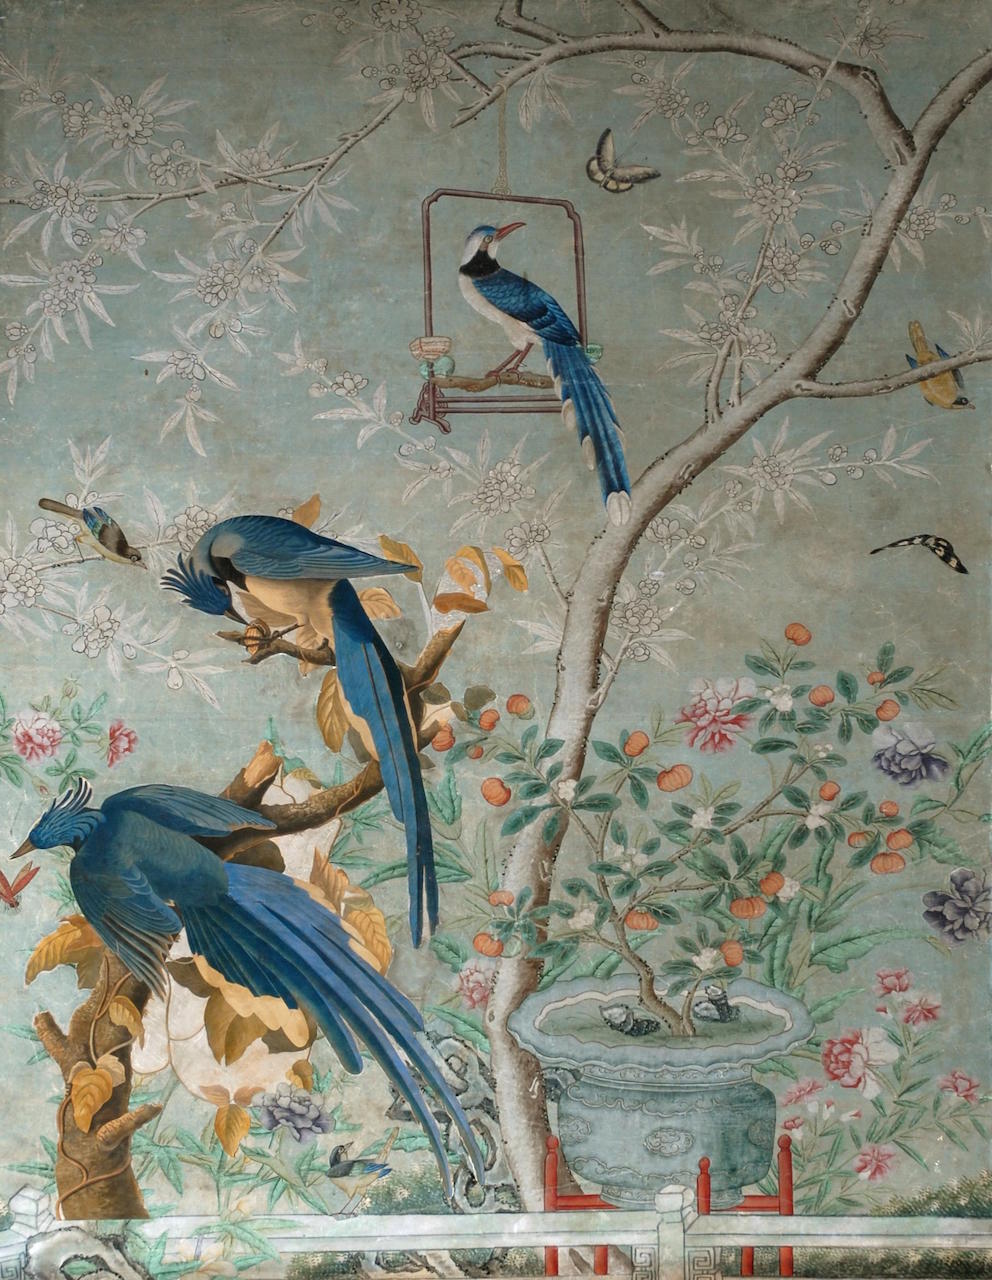 Chinoiserie wallpaper with blue painted bird cut outs used over the top